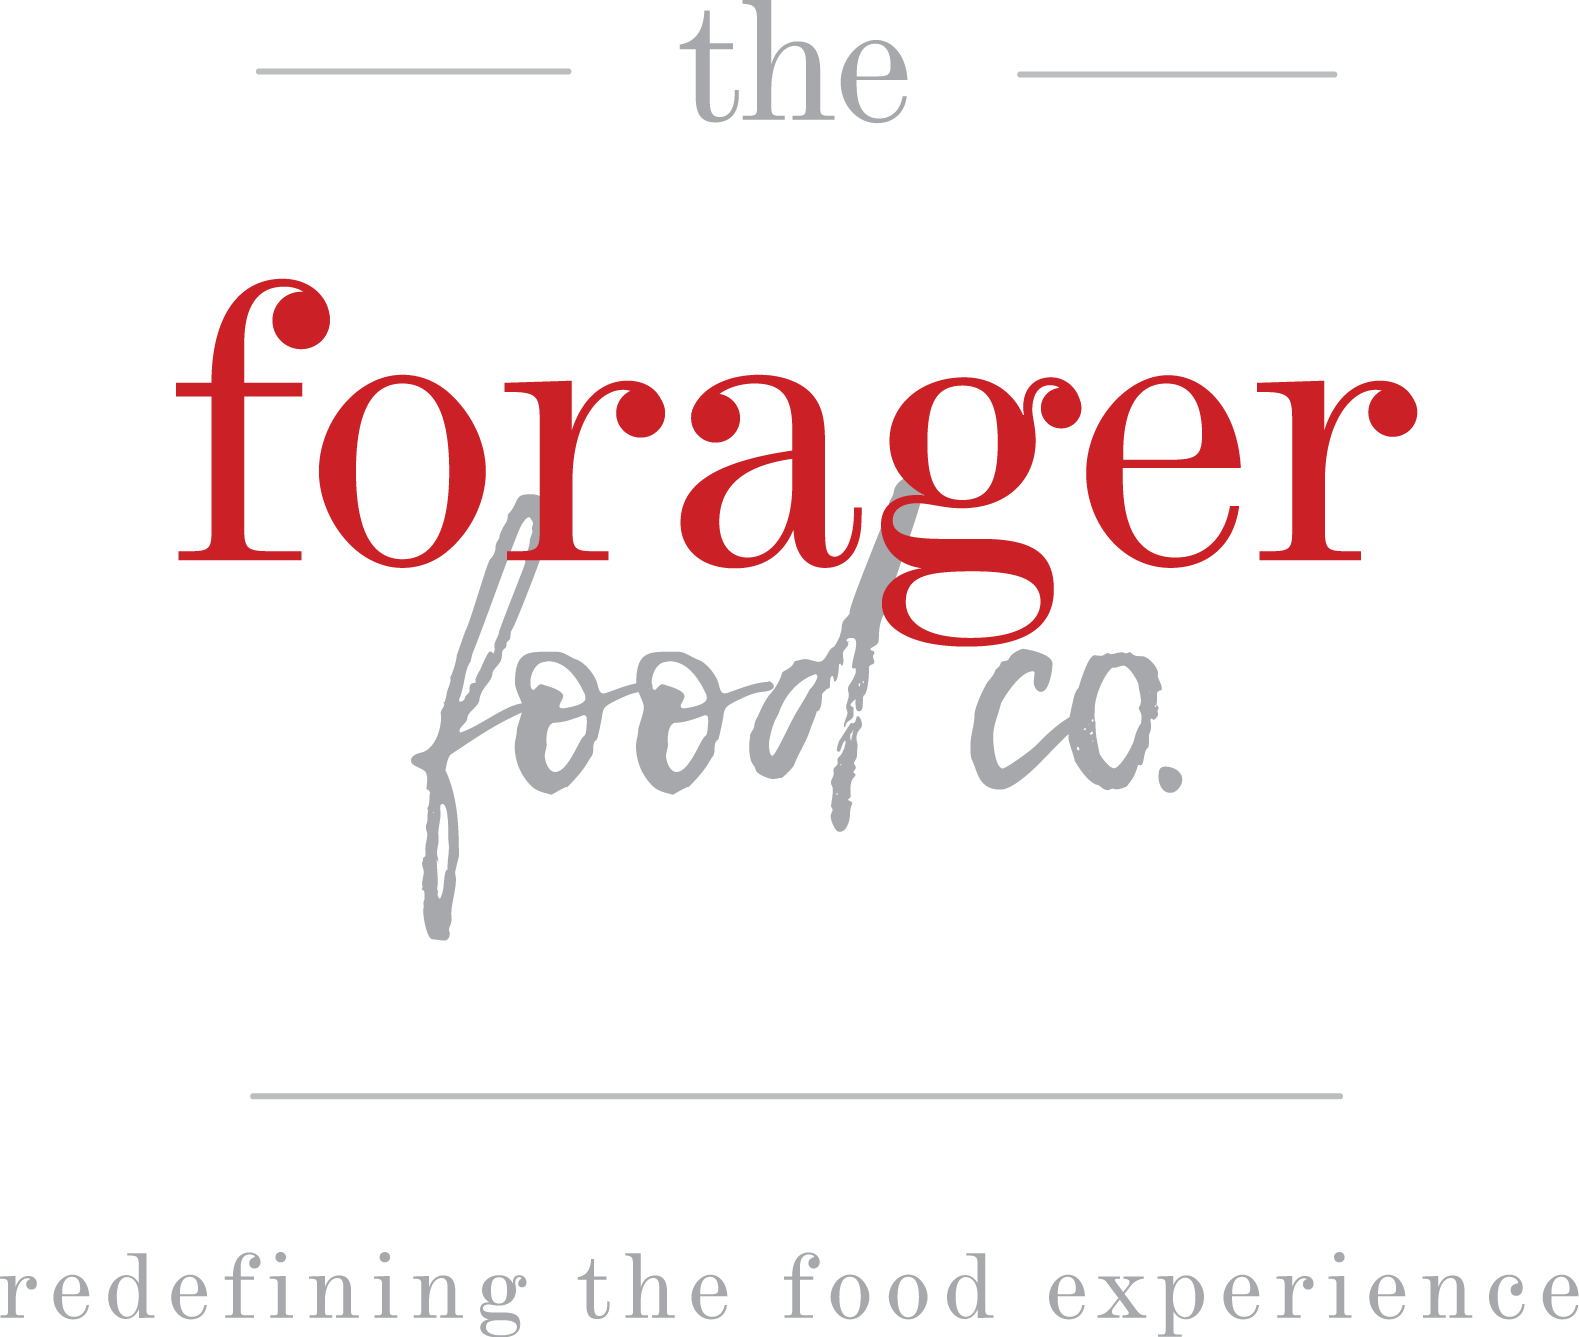 Forager Foods